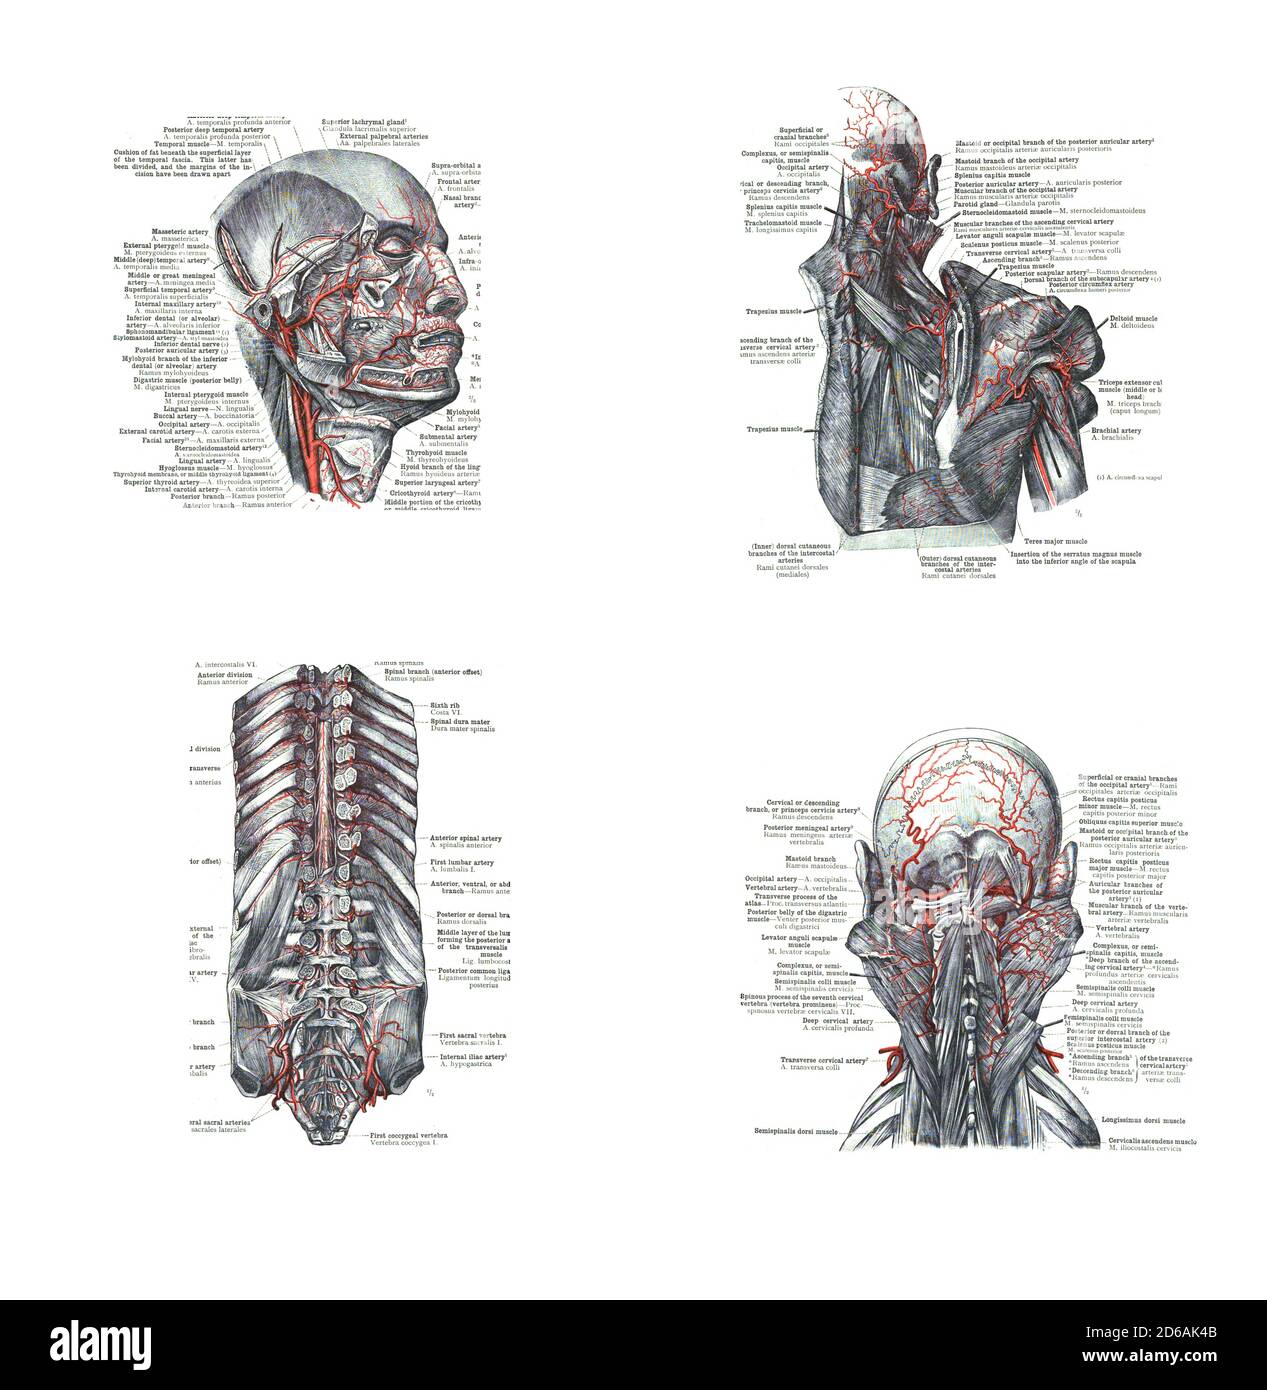 4 Views Of The Head Back And Spine From An Atlas Of Human Anatomy Carl Toldt 1904 Stock Photo Alamy